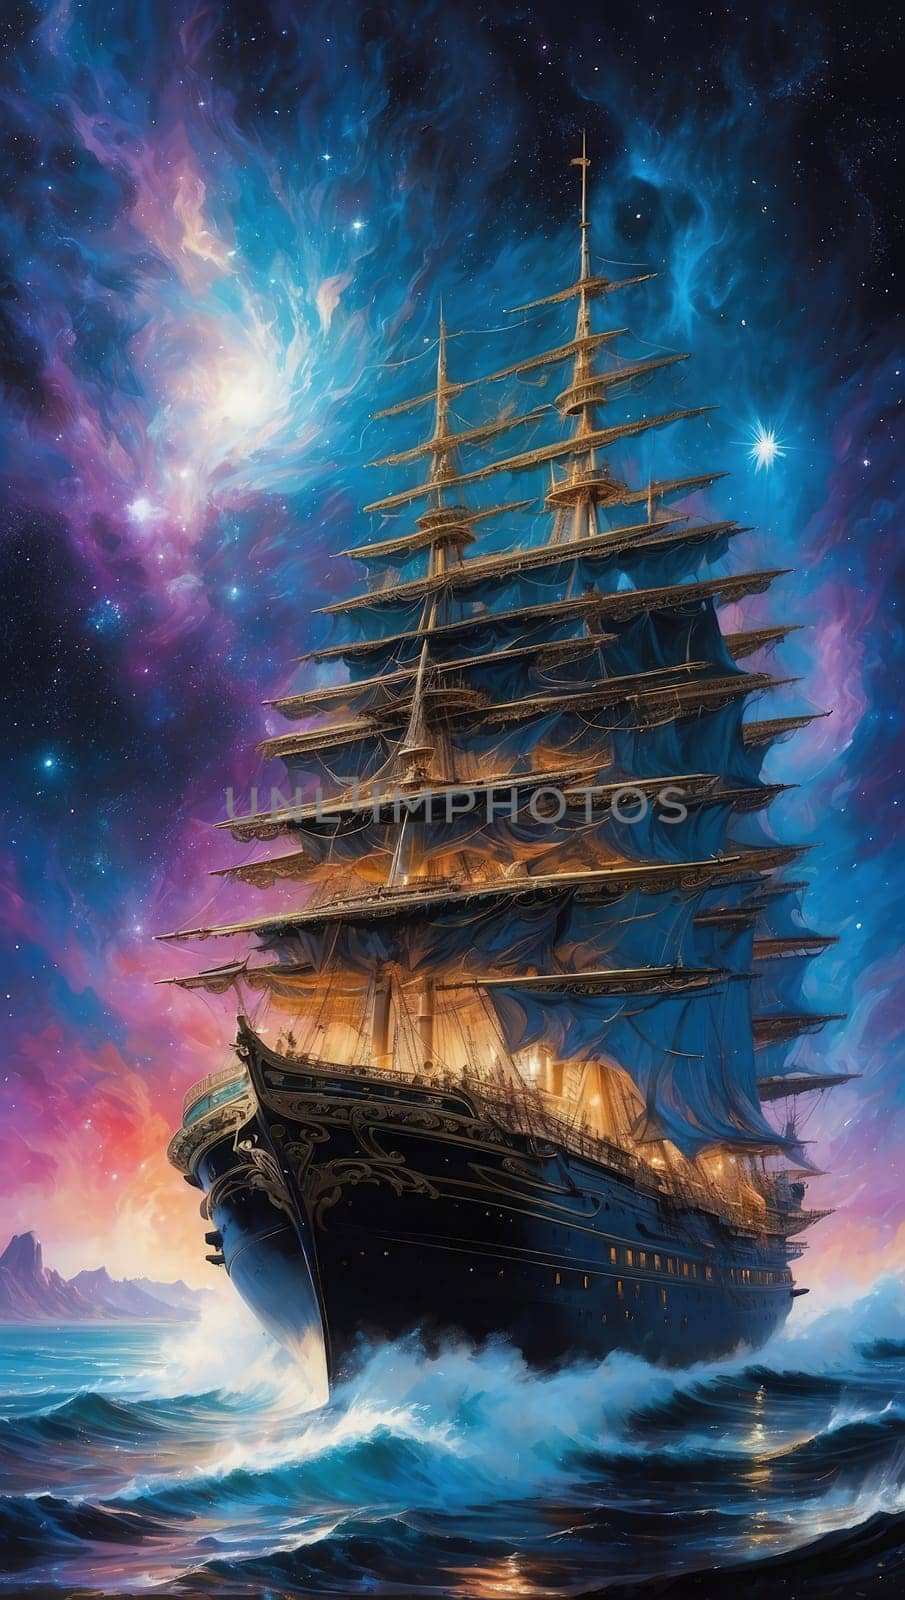 Sailing ship in the night cosmos sky. Fantasy painting of cruise boat in universe galaxy. 3D digital illustration.